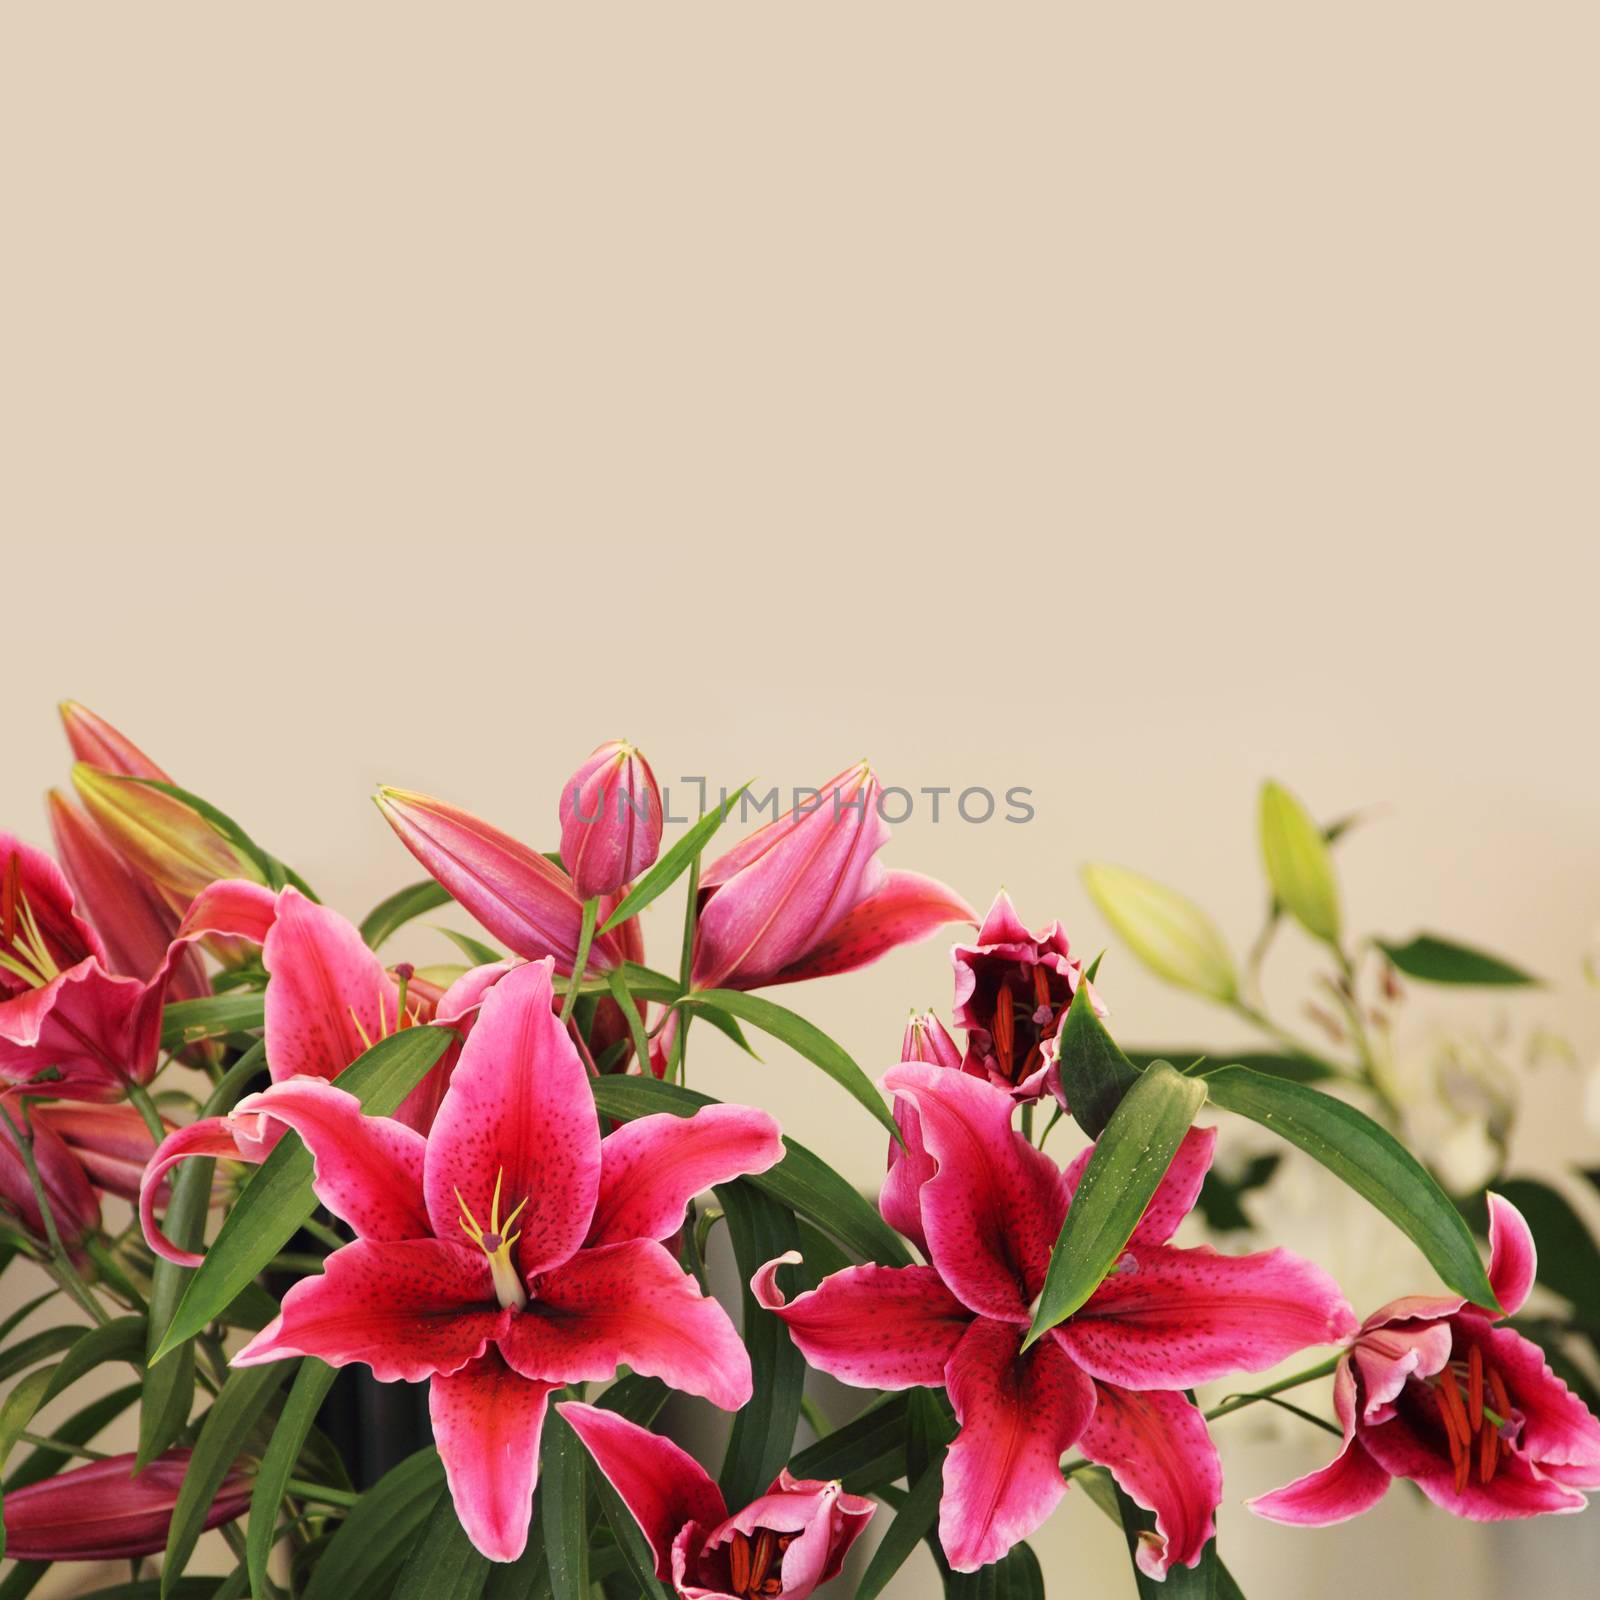 Pink lily flower bouquet on Beige background close up with copy space